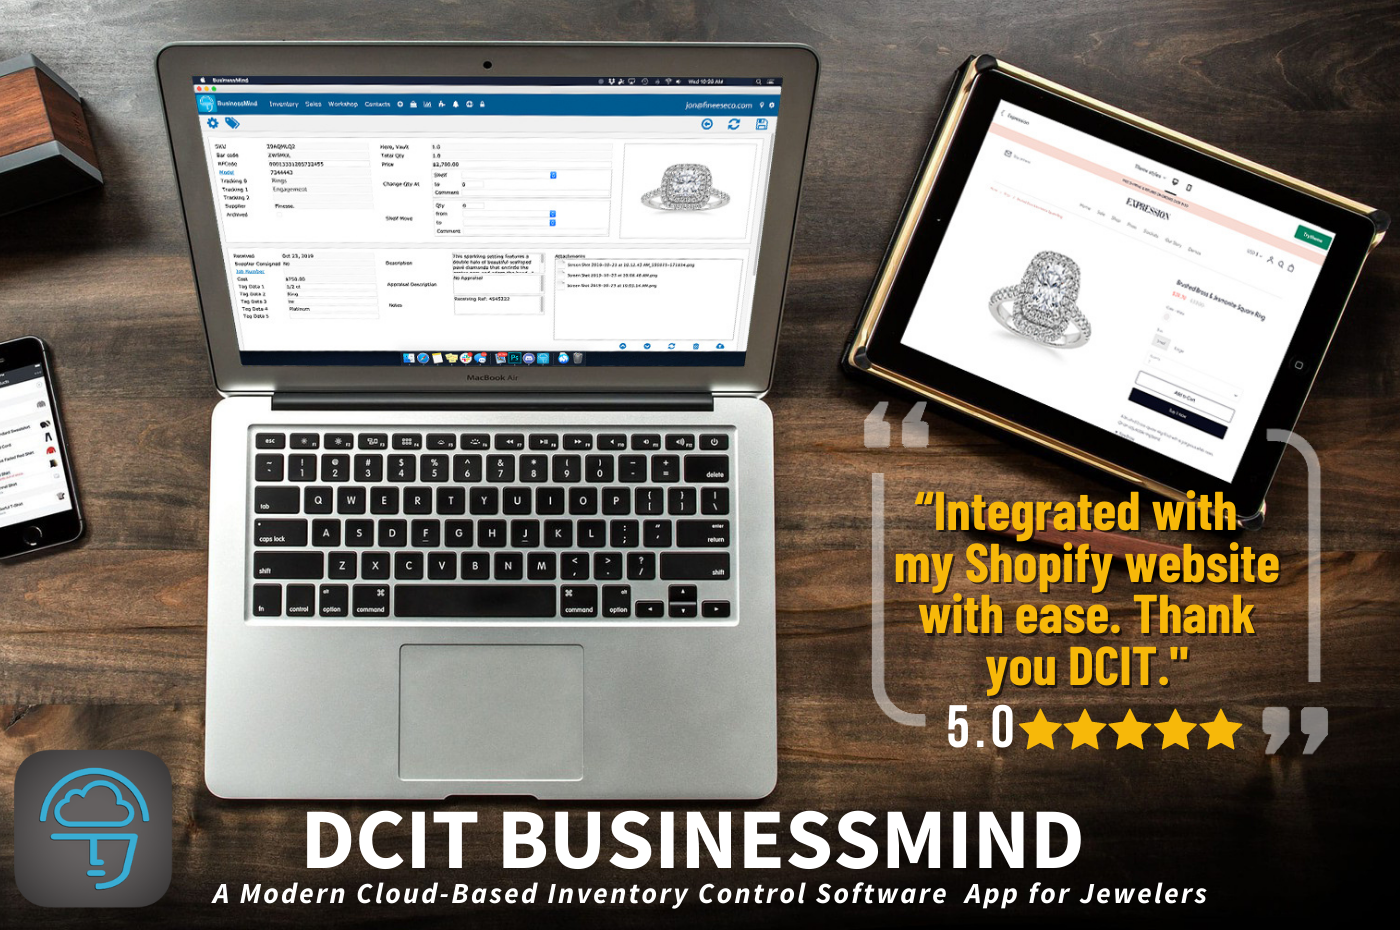 Build an online shop quickly and easily, that is both beautiful and distinctive, with BusinessMind's Shopify integration capabilities.